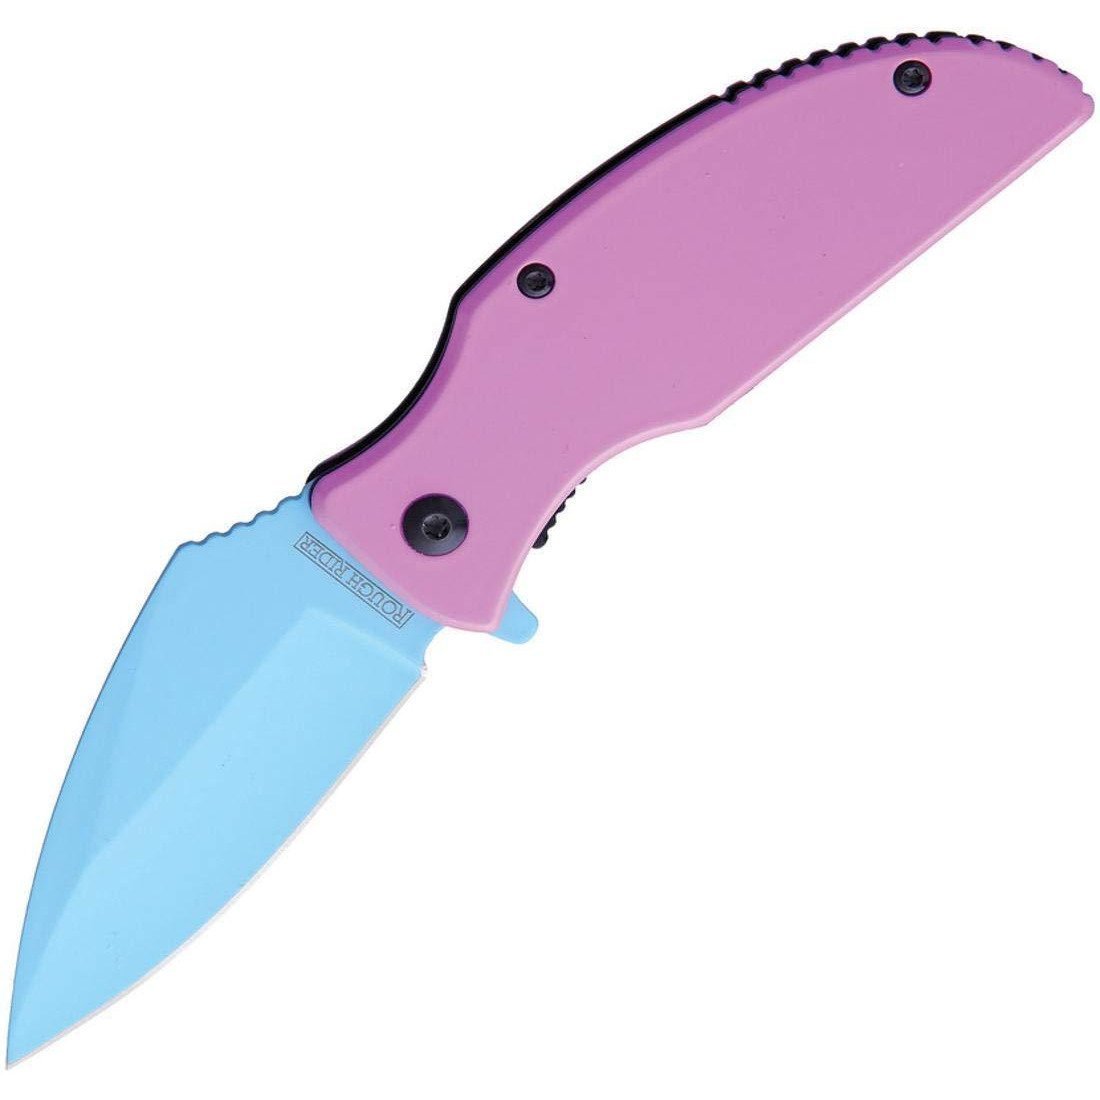 Polly Pocket Knife - Blades For Babes - Spring Assisted - 4